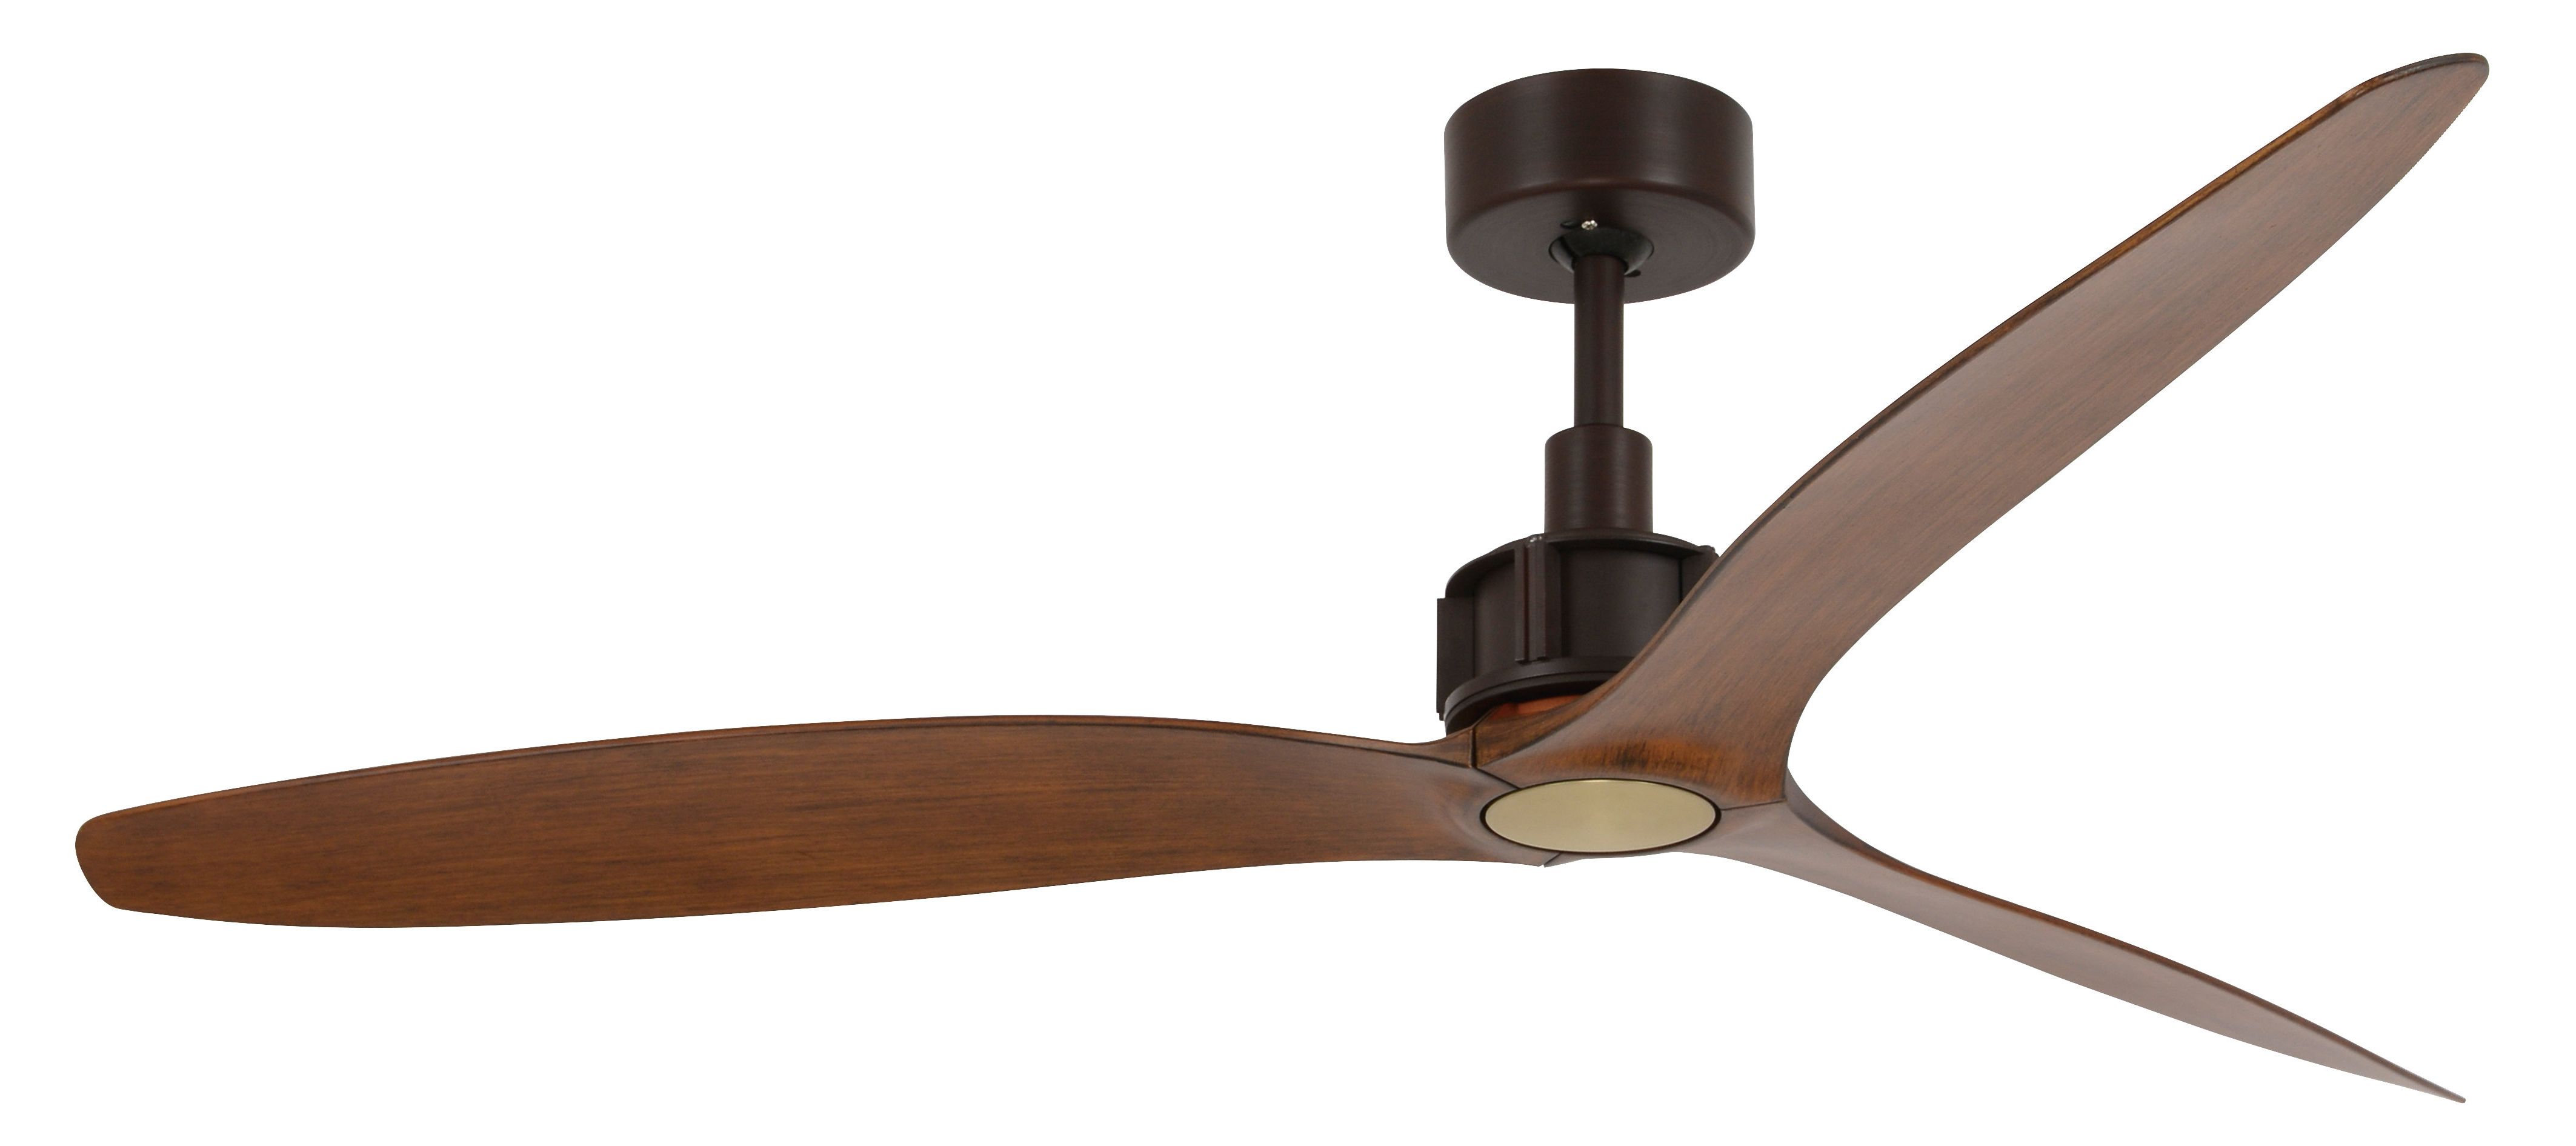 Troxler 3 Blade Ceiling Fans Within 2020 Modern Rustic Interiors Theron 52" Catoe 3 Blade Ceiling Fan With Remote (Photo 4 of 20)